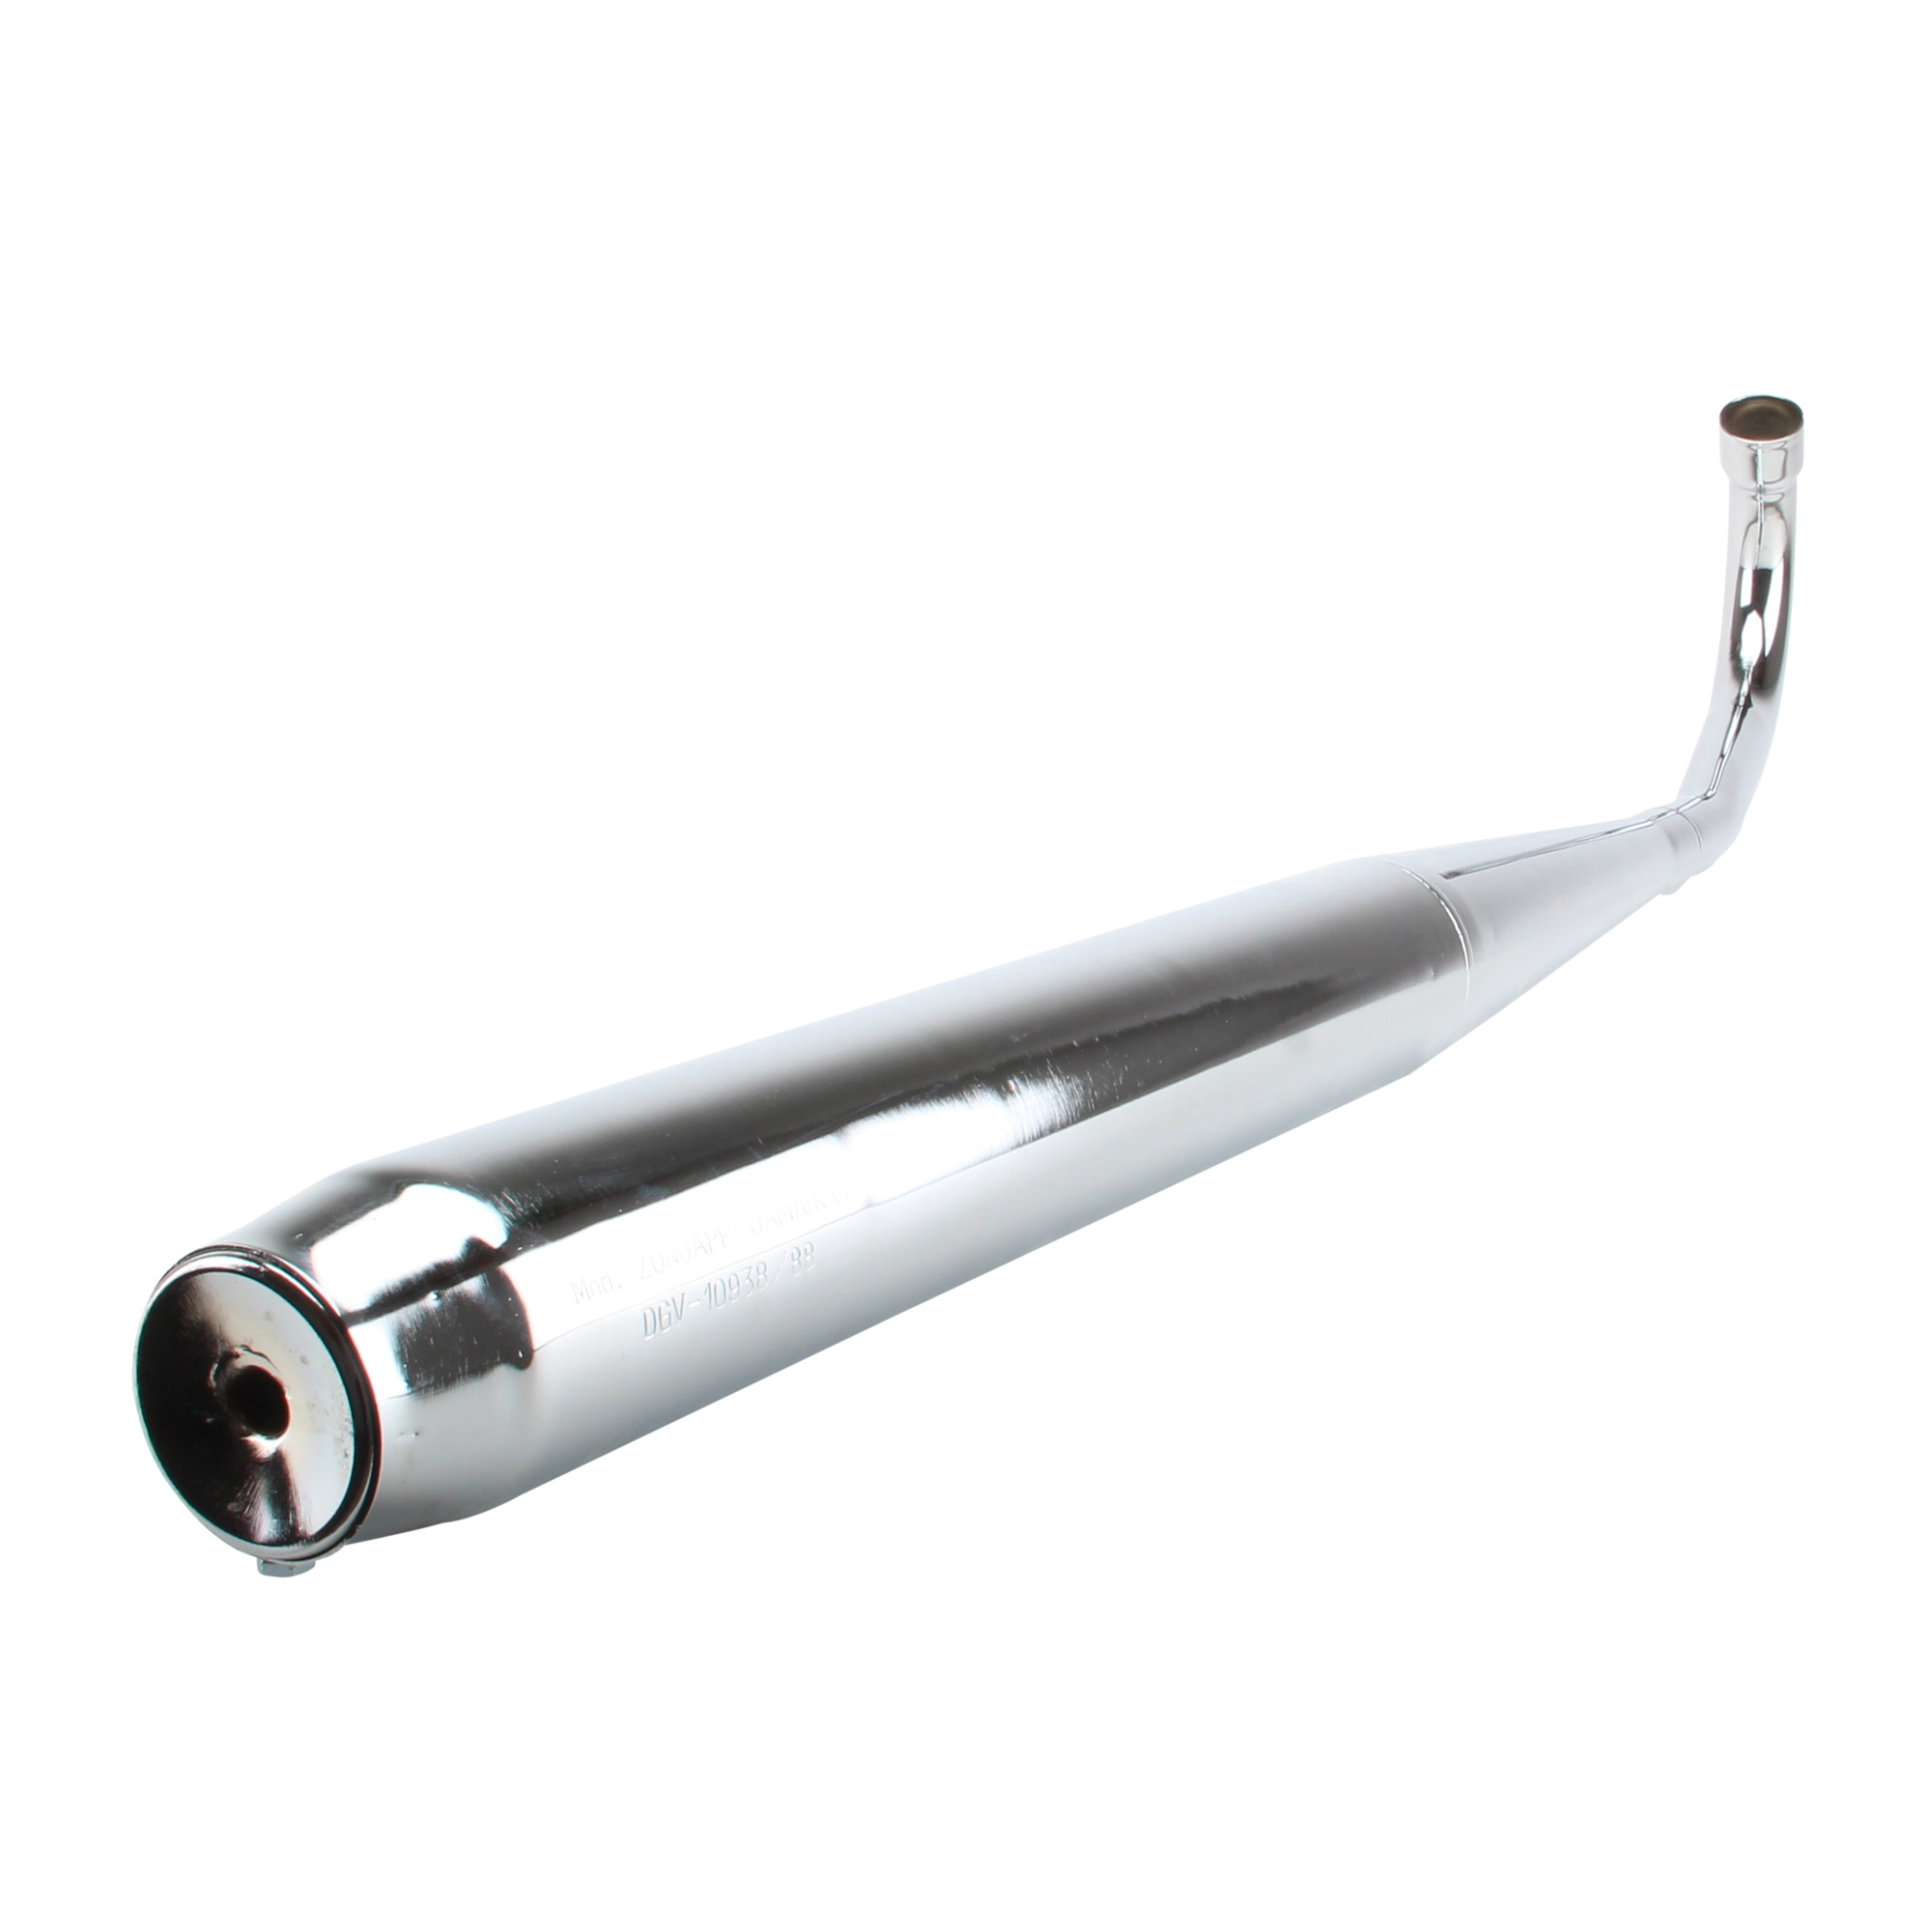 Tuning exhaust system chrome 70/1030/36mm closed for Zundapp CS GTS KS 50  type 448 529 540, Exhaust system, Exhaust & Manifold, Moped exhaust, Moped parts